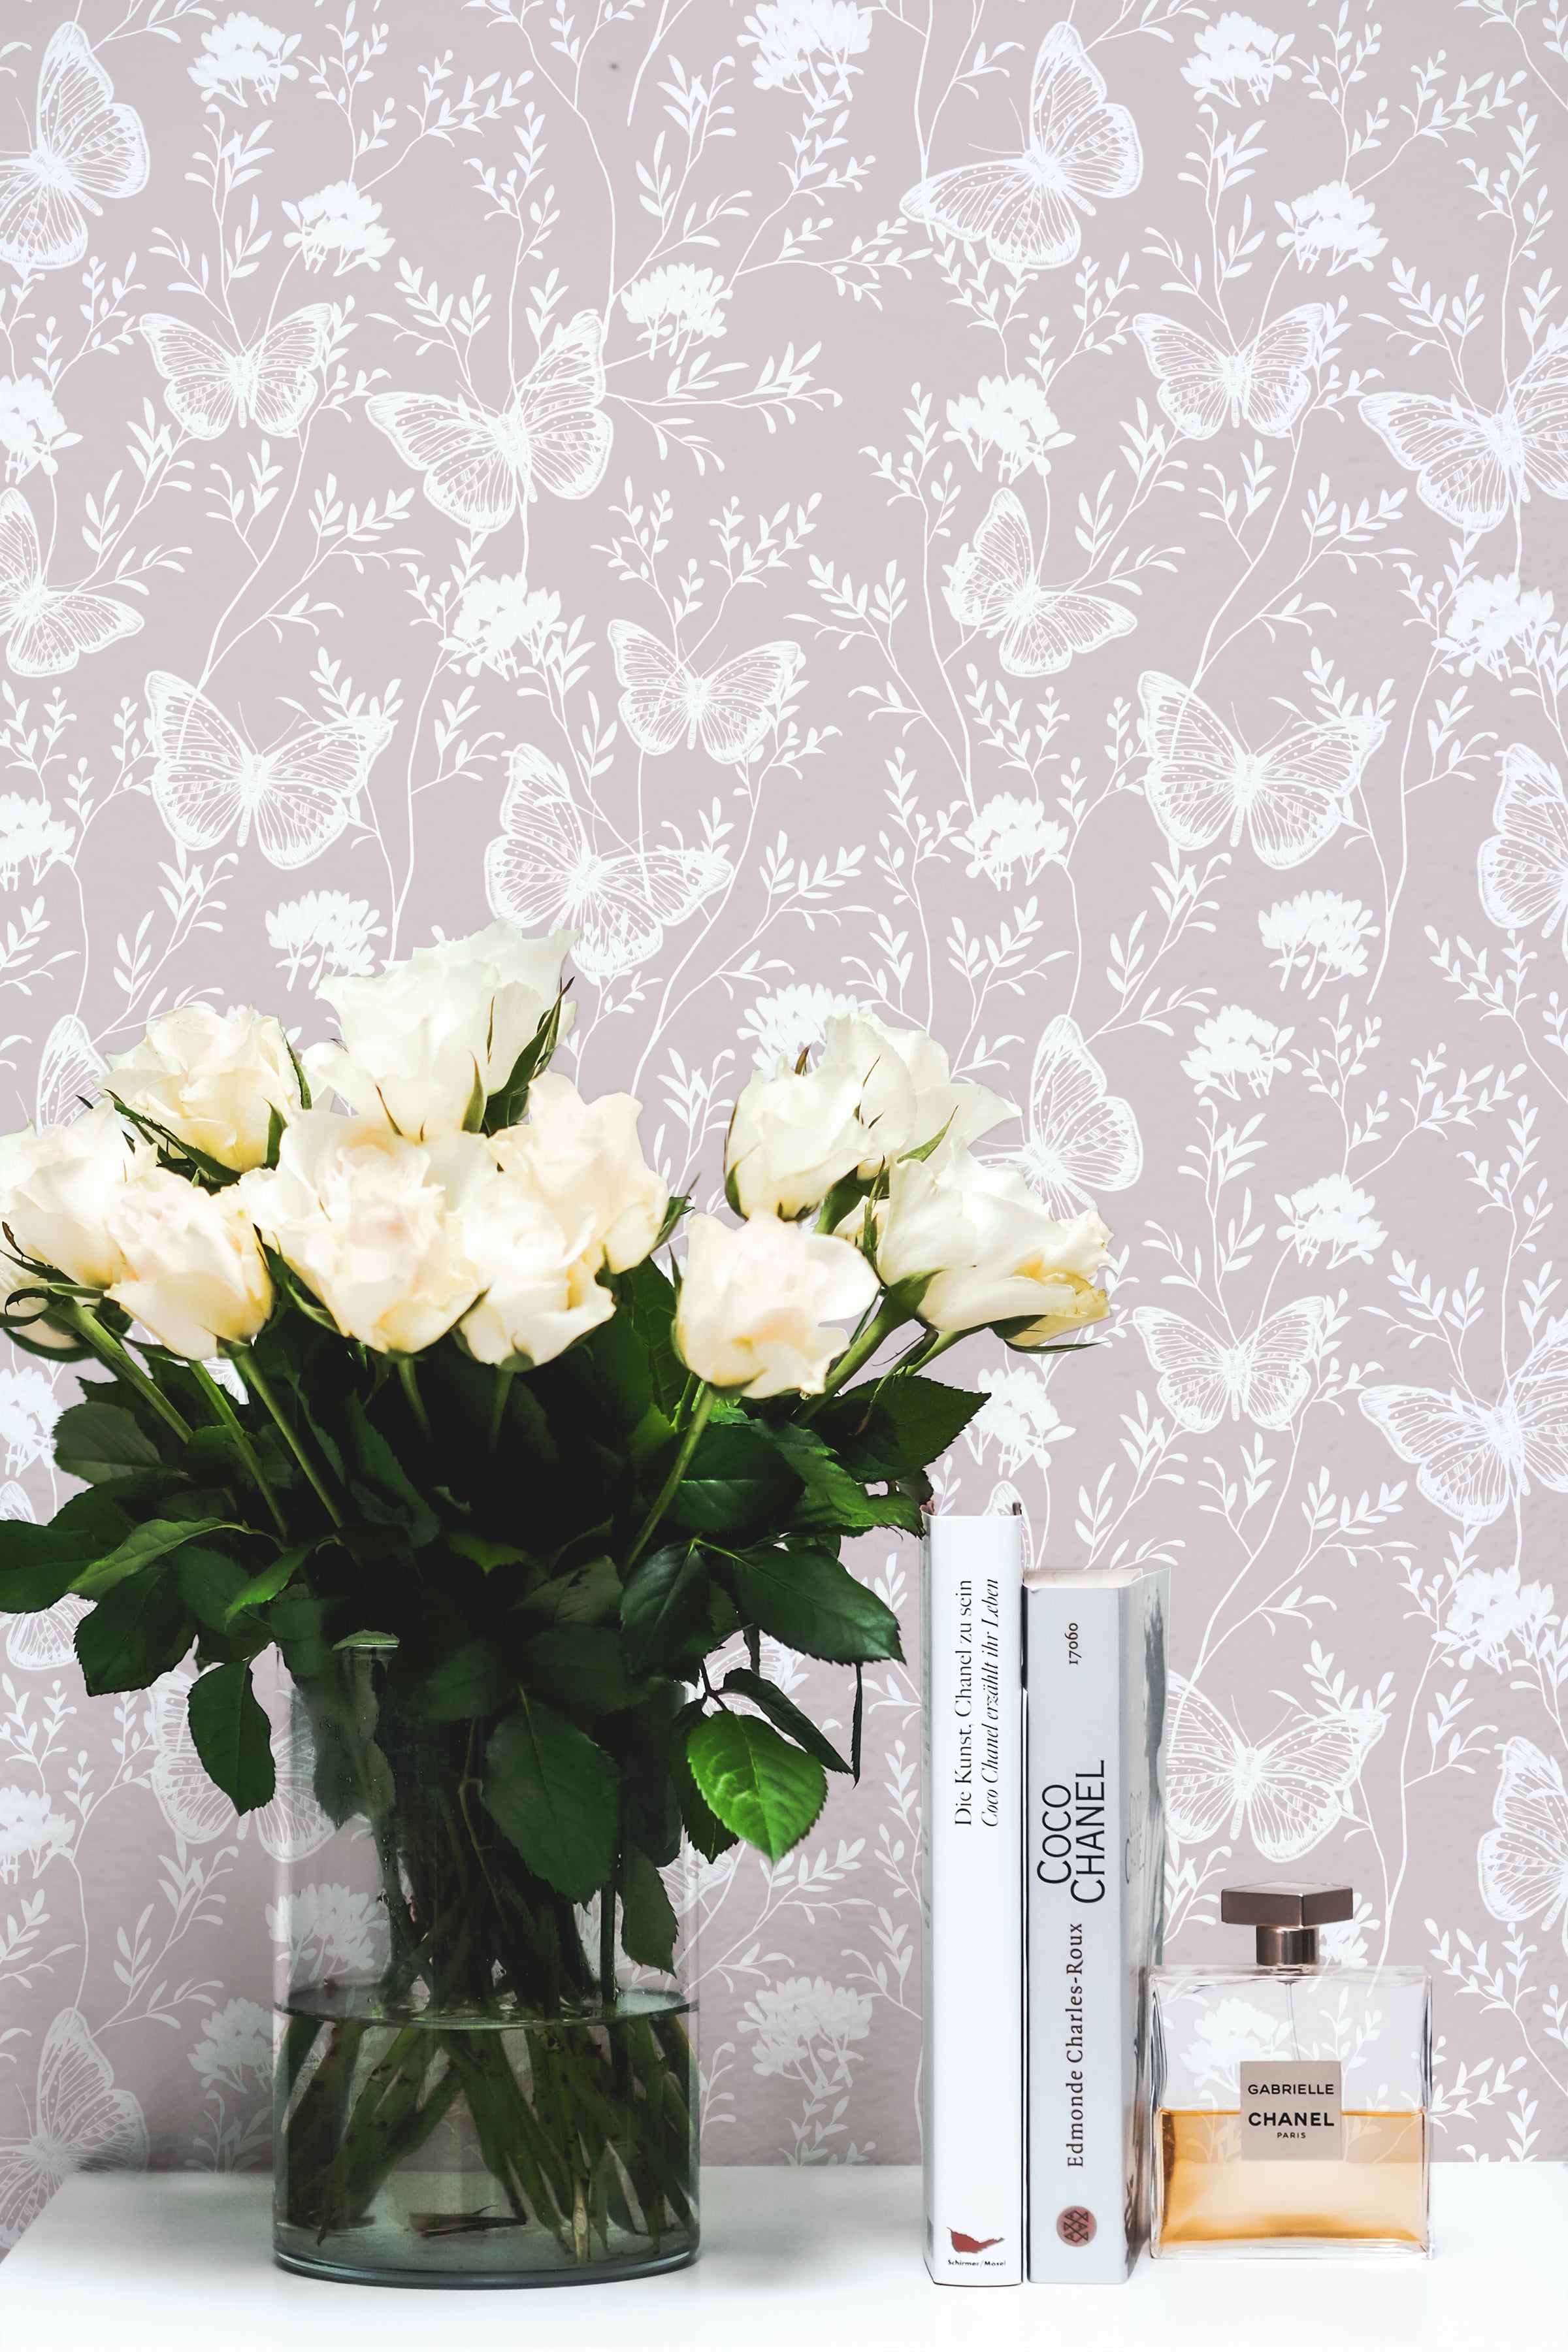 a closer look at the "Whimsical Wings Wallpaper," where a bouquet of cream roses in a clear vase is positioned against the backdrop. The delicate butterflies and floral outlines on the wallpaper add a sophisticated and gentle touch to the decor.